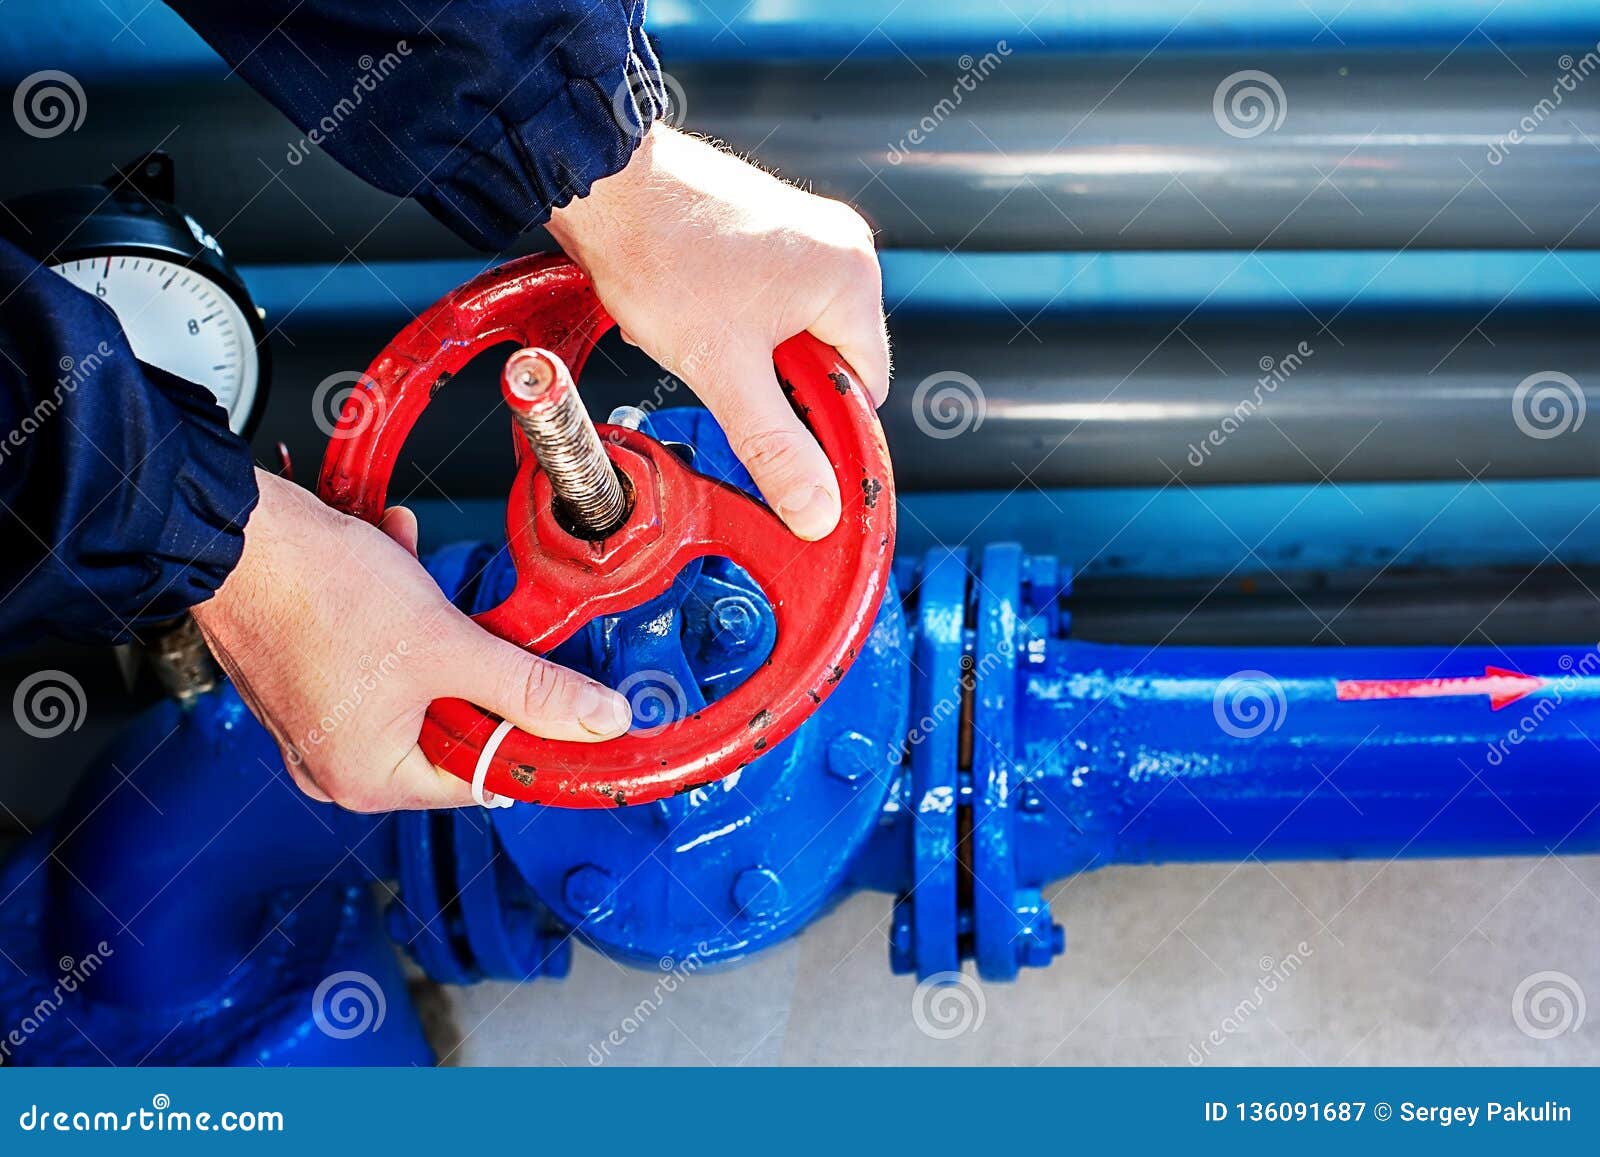 the hands of the worker unscrew rotate the red valve to supply the gas supply. top view close-up